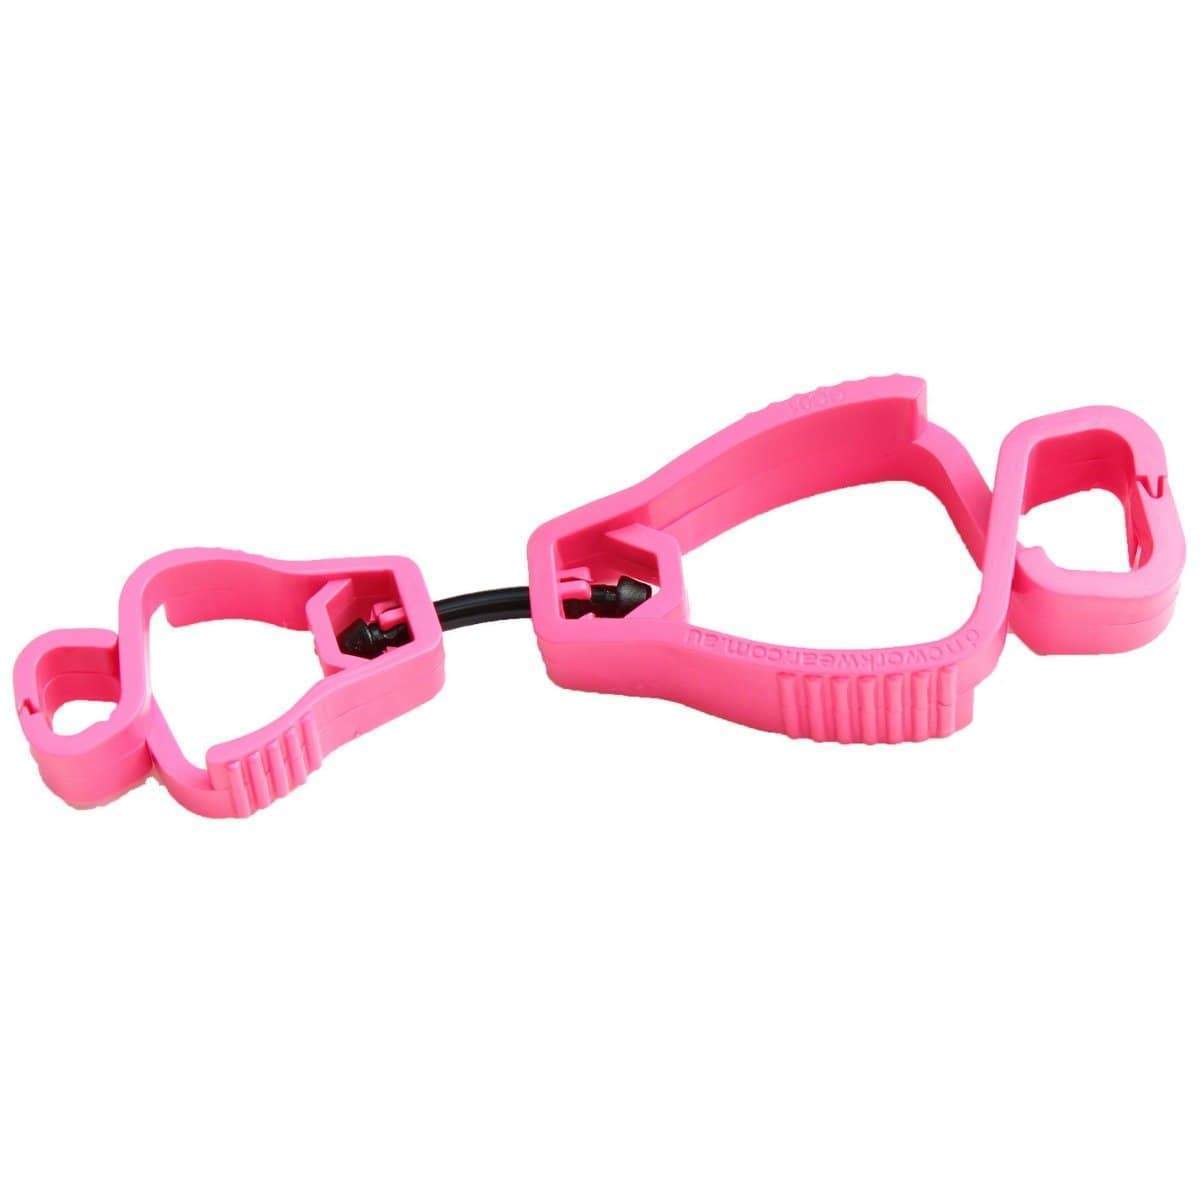 Dnc Workwear Super Jaws Glove Clips X12 - GC01 PPE DNC Workwear Pink One Size 